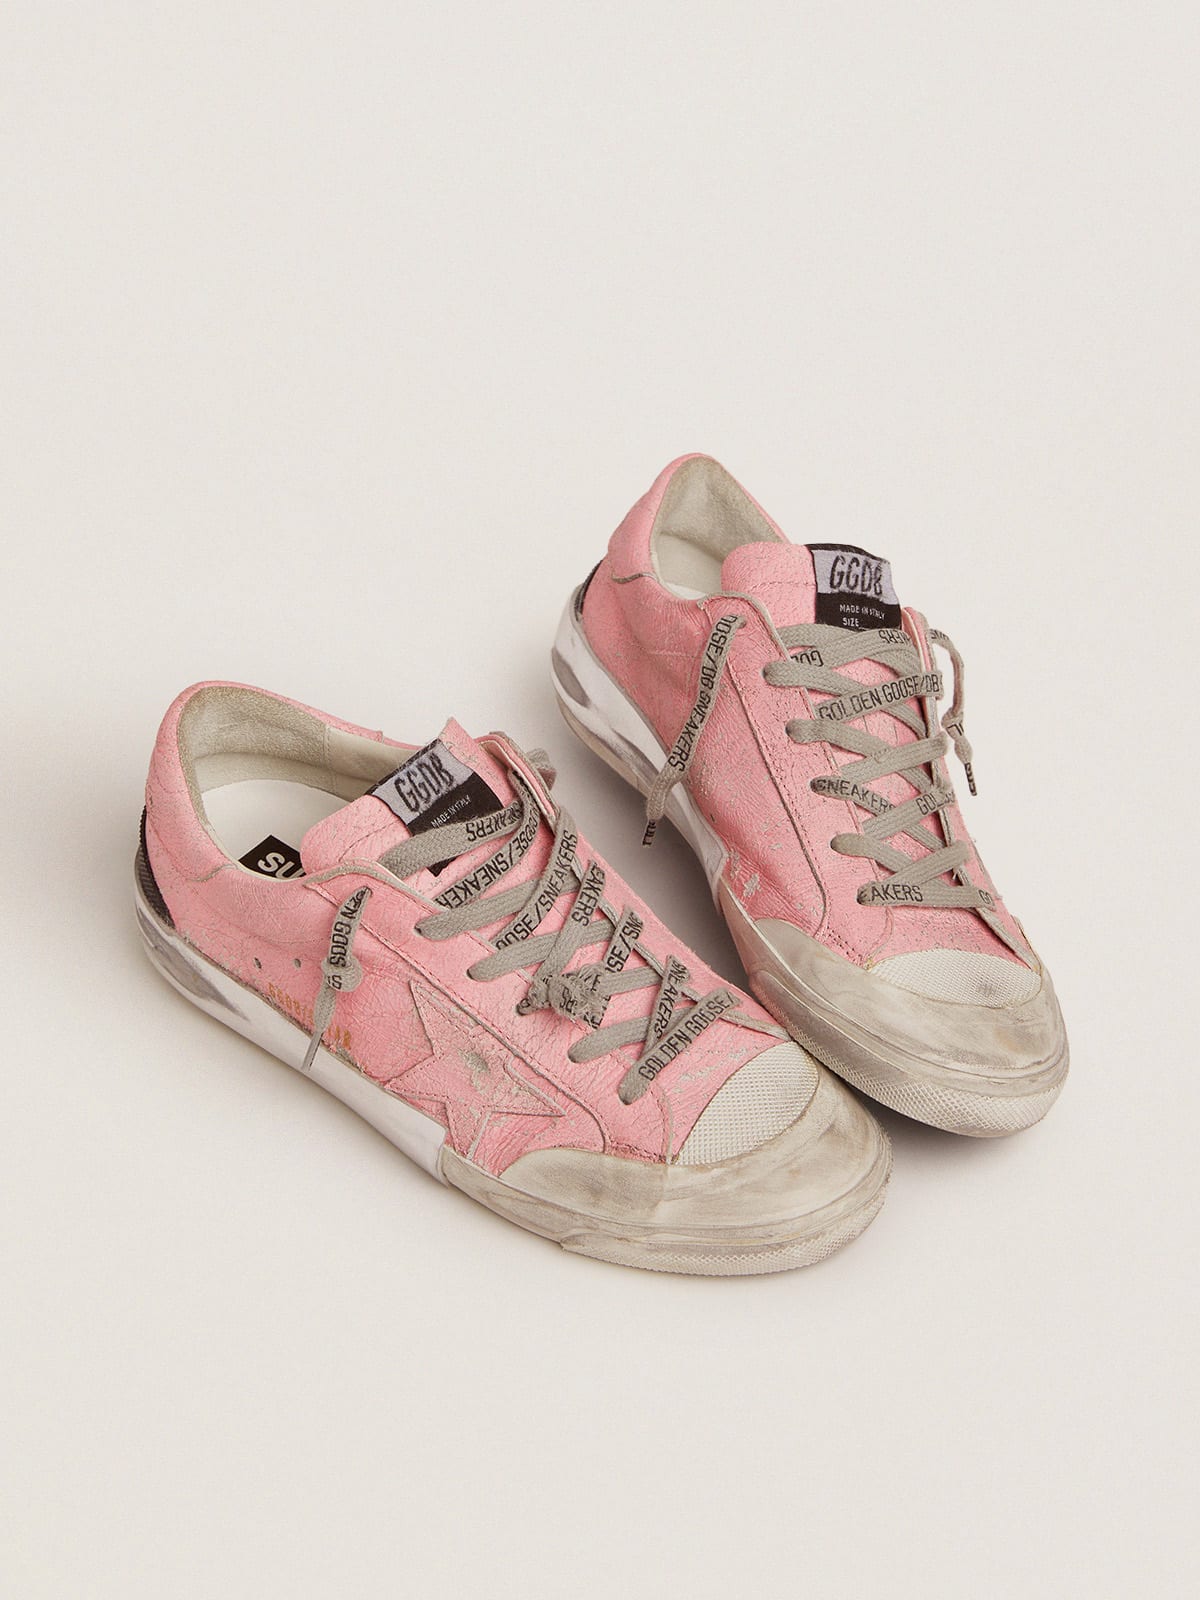 Super-Star sneakers in pink crackled leather and multi-foxing | Golden Goose